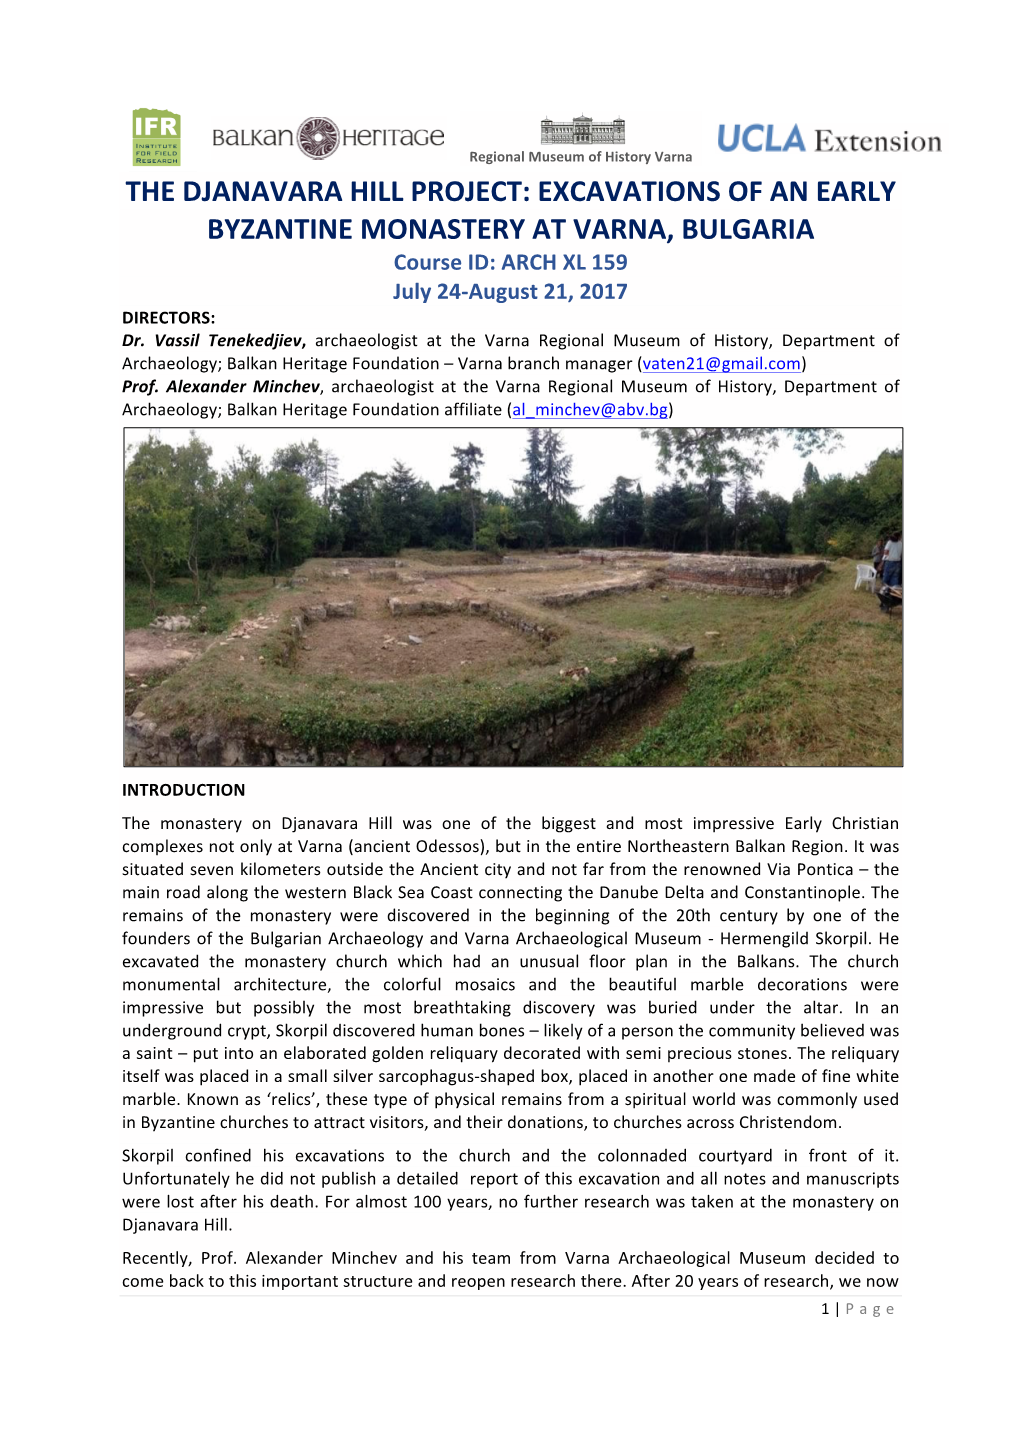 THE DJANAVARA HILL PROJECT: EXCAVATIONS of an EARLY BYZANTINE МONASTERY at VARNA, BULGARIA Course ID: ARCH XL 159 July 24-August 21, 2017 DIRECTORS: Dr